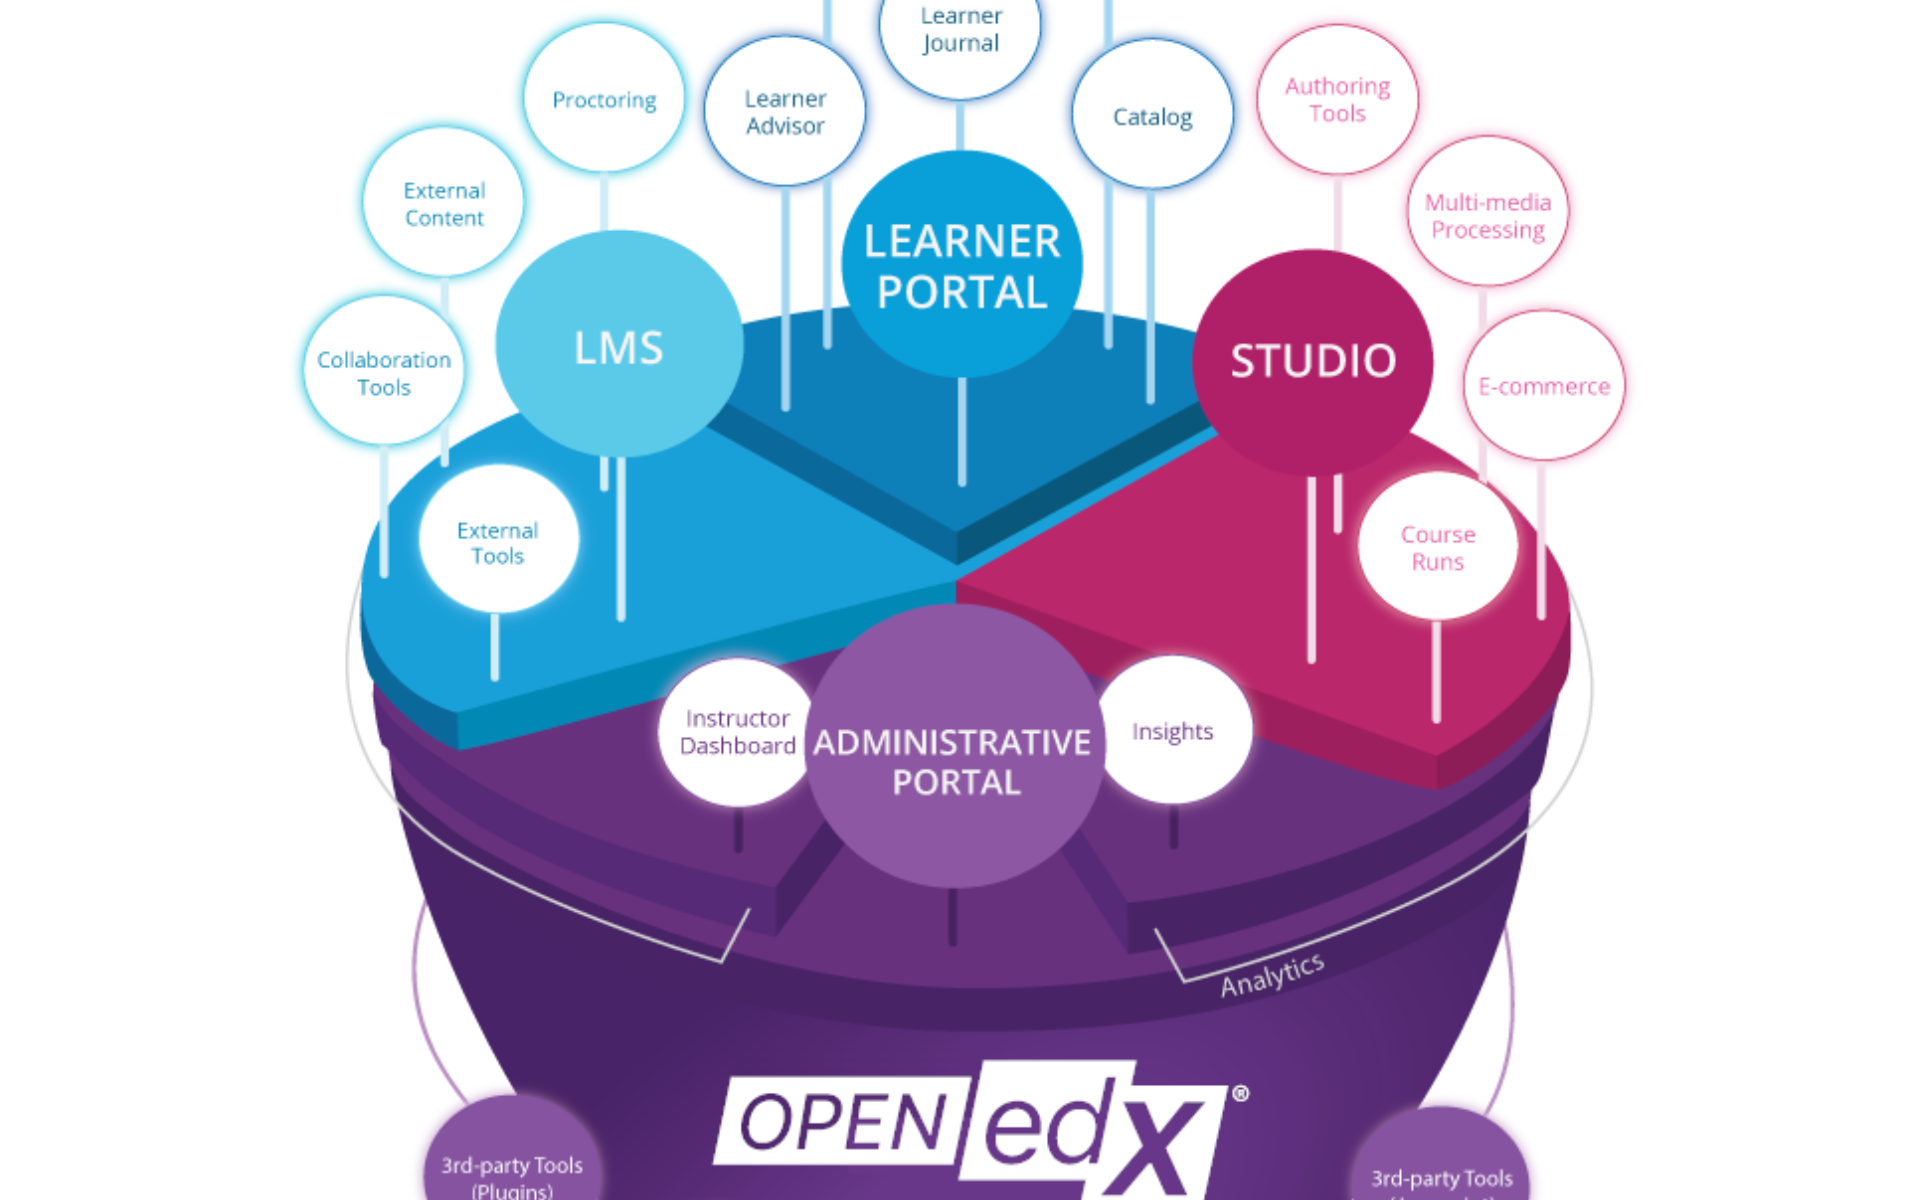 Open-edx LMS. Learner-centric and massively scalable Learning Management System